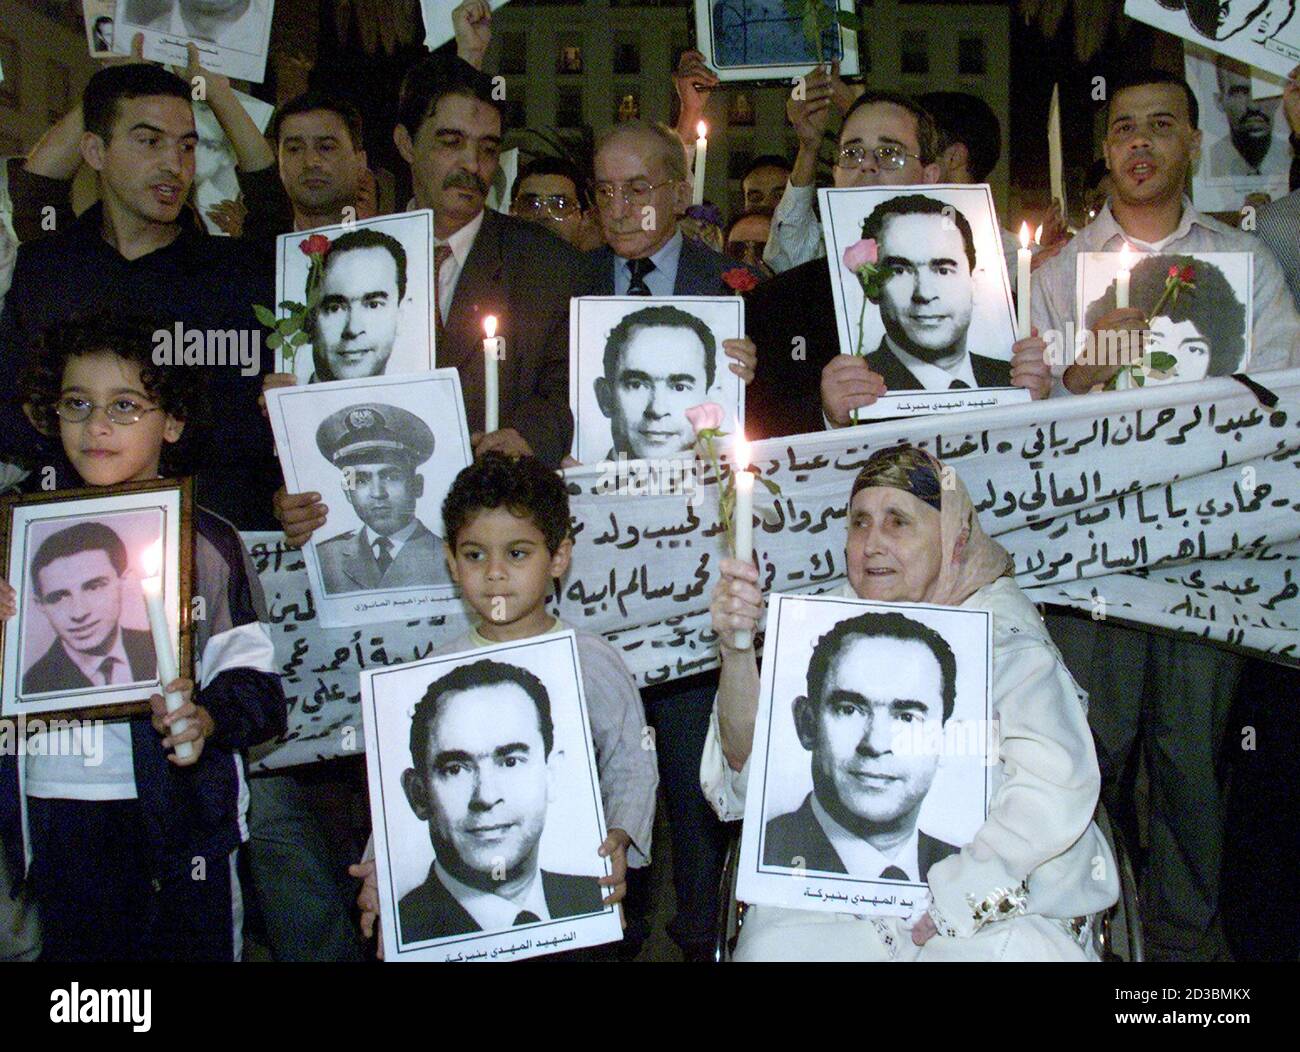 Moroccans hold portraits of former Moroccan opposition leader Mehdi Ben Barka during a candle-lit gathering in Rabat late October 29, 2002. Ben Barka, the charismatic exiled leftist leader, was seized in October 1965 in front of the Lippe cafe in the Latin Quarter of Paris, but what happened to him after remains the source of much conjecture. REUTERS/Joelle Vassort  JES/JDP Stock Photo